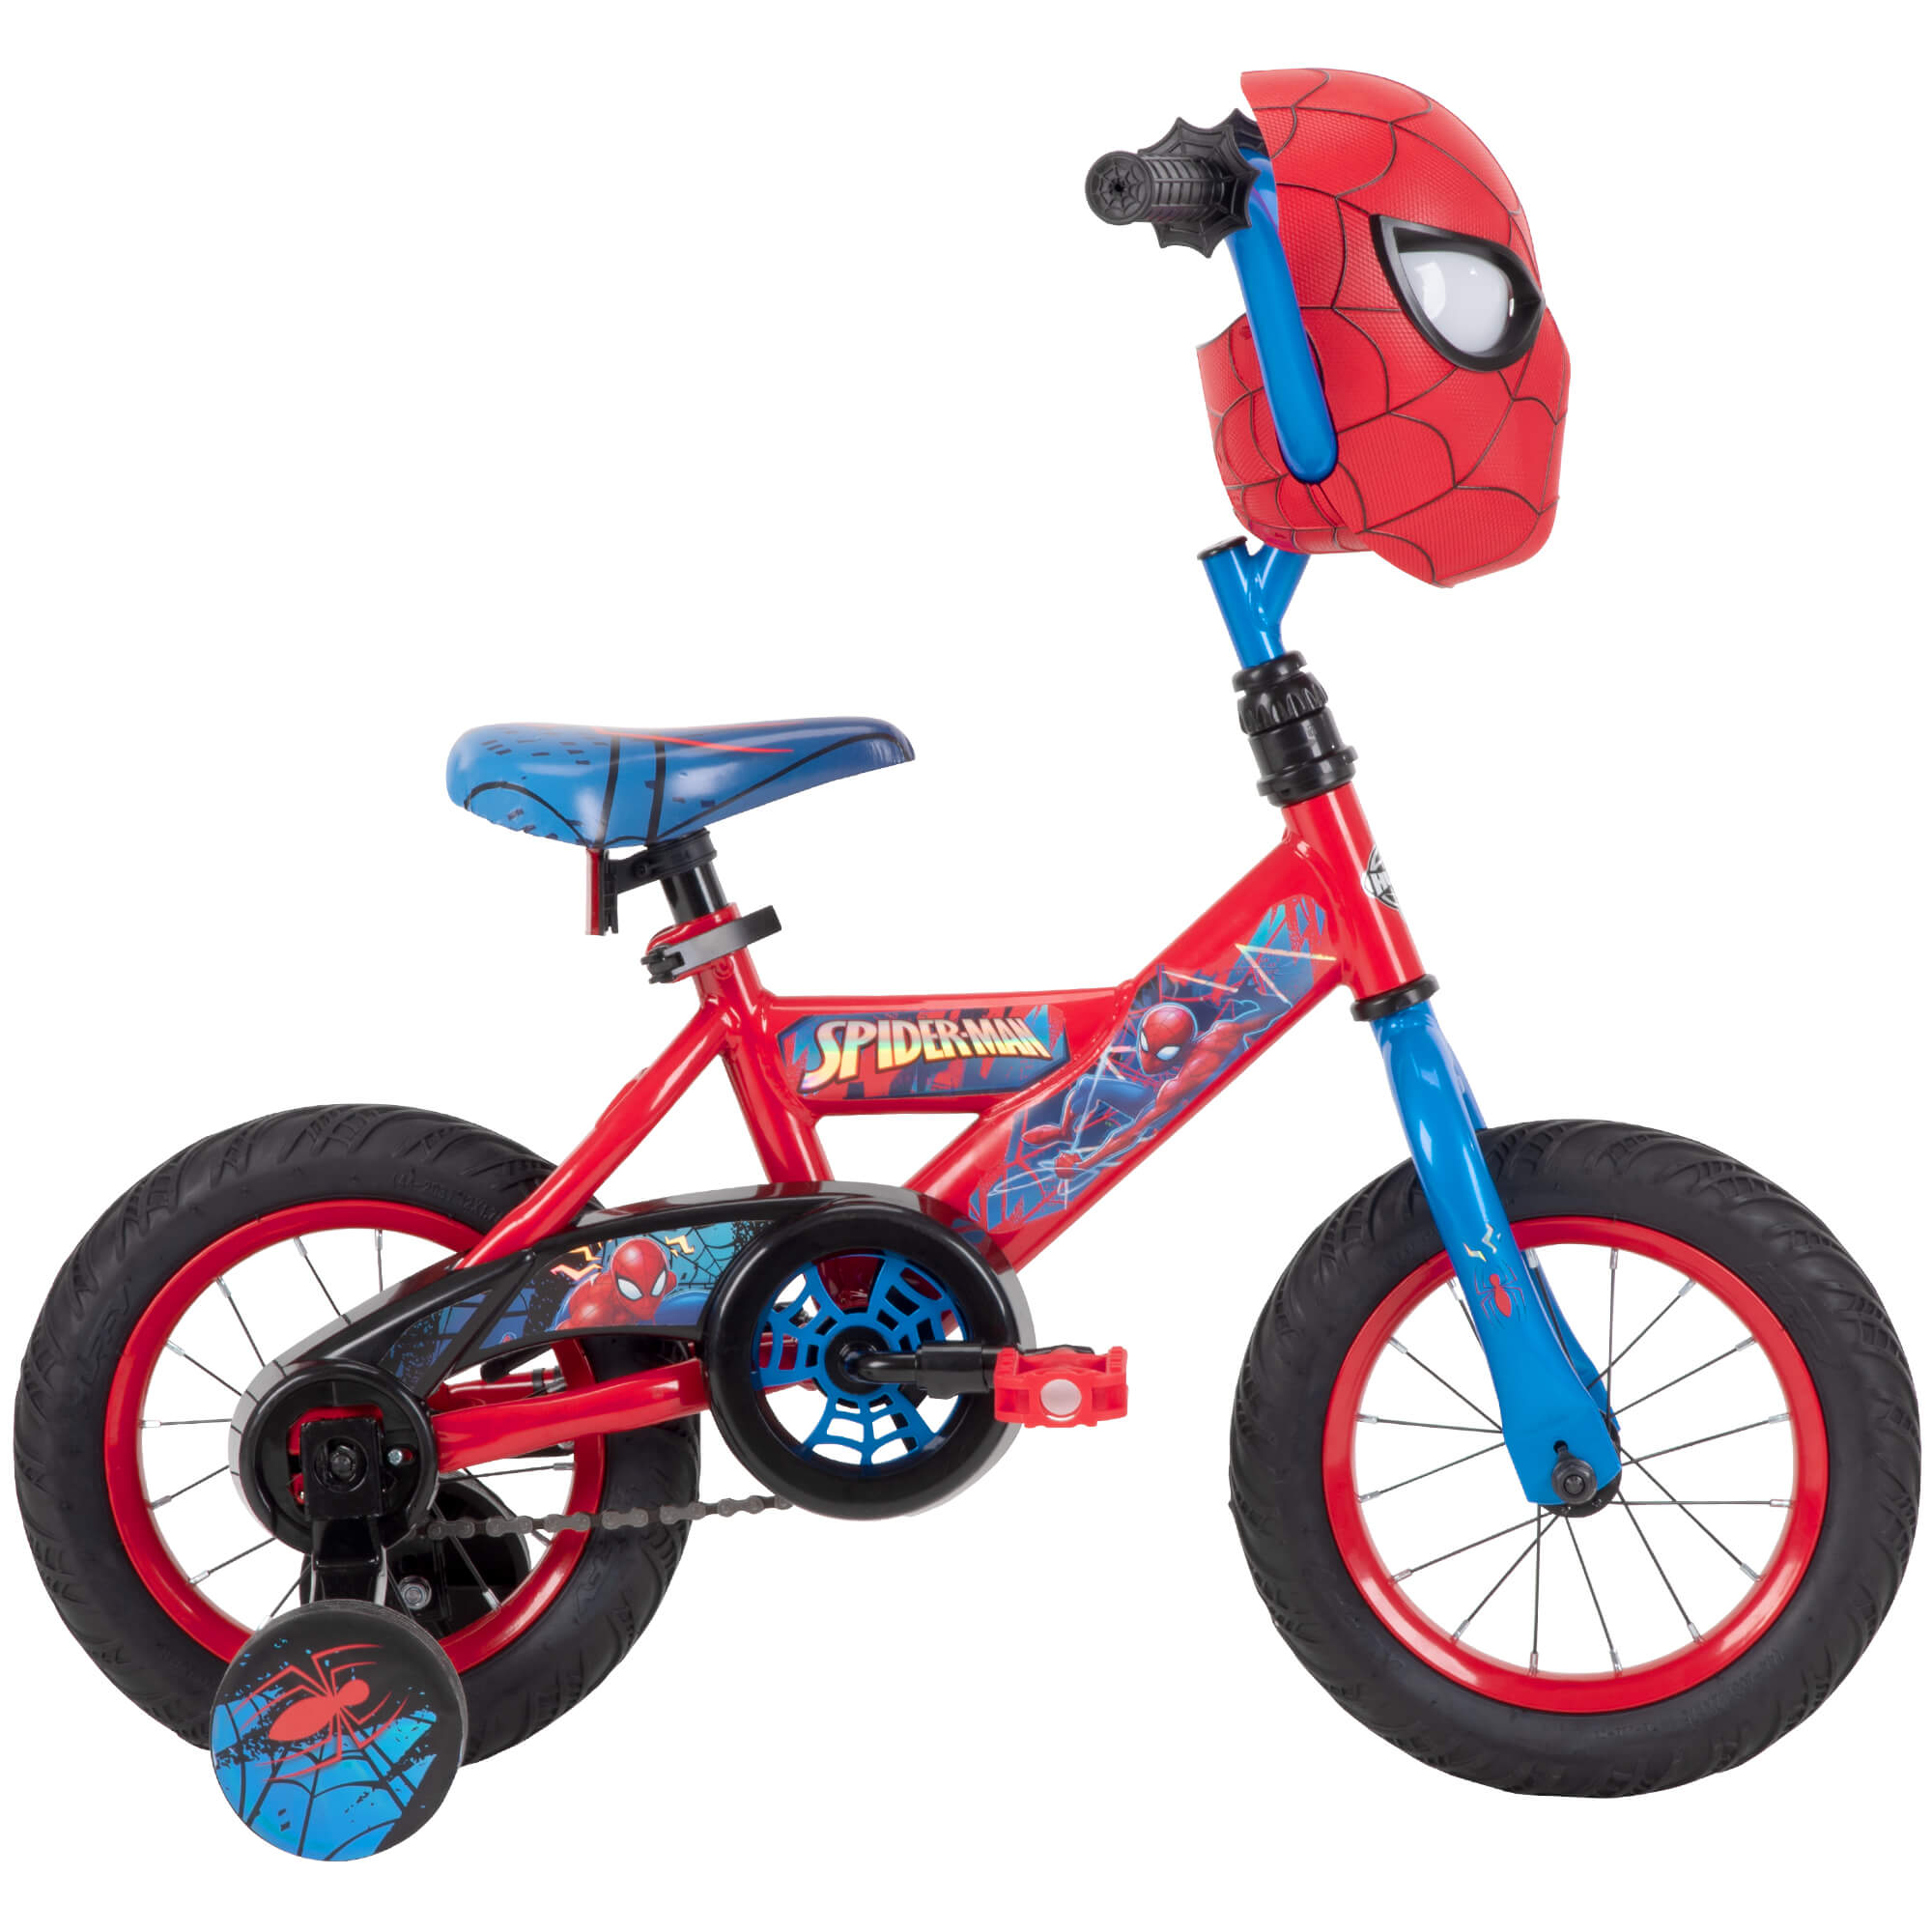 12" Marvel Spider-Man Bike with Training Wheels, for Boys', Red by Huffy - image 1 of 12